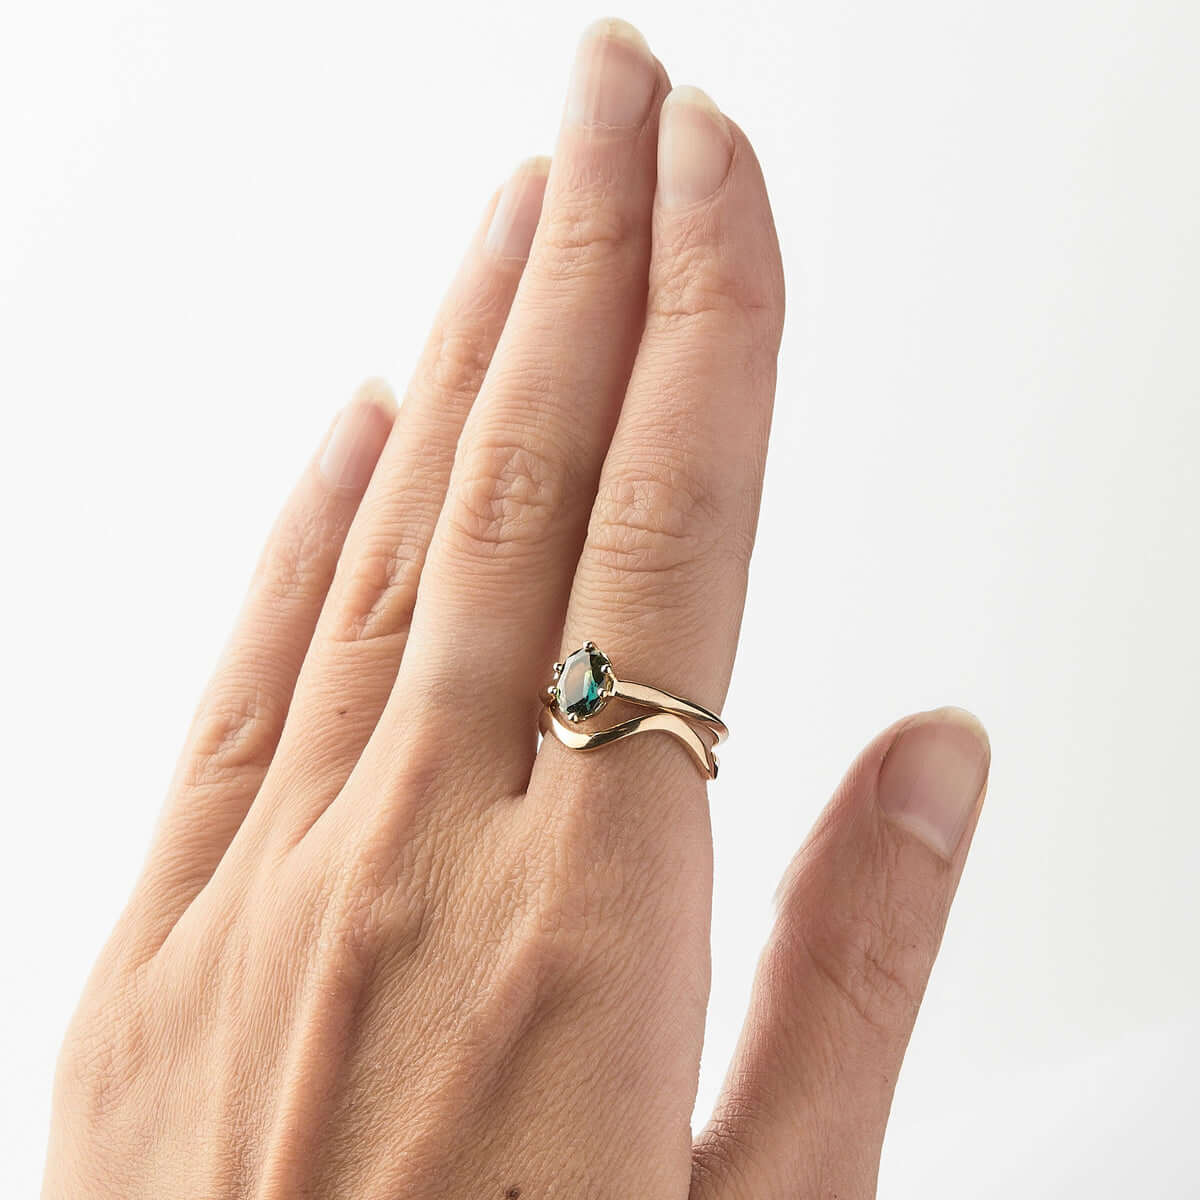 A hand showing off a yellow gold ring with an green oval Australian sapphire paired with a wavy gold band.